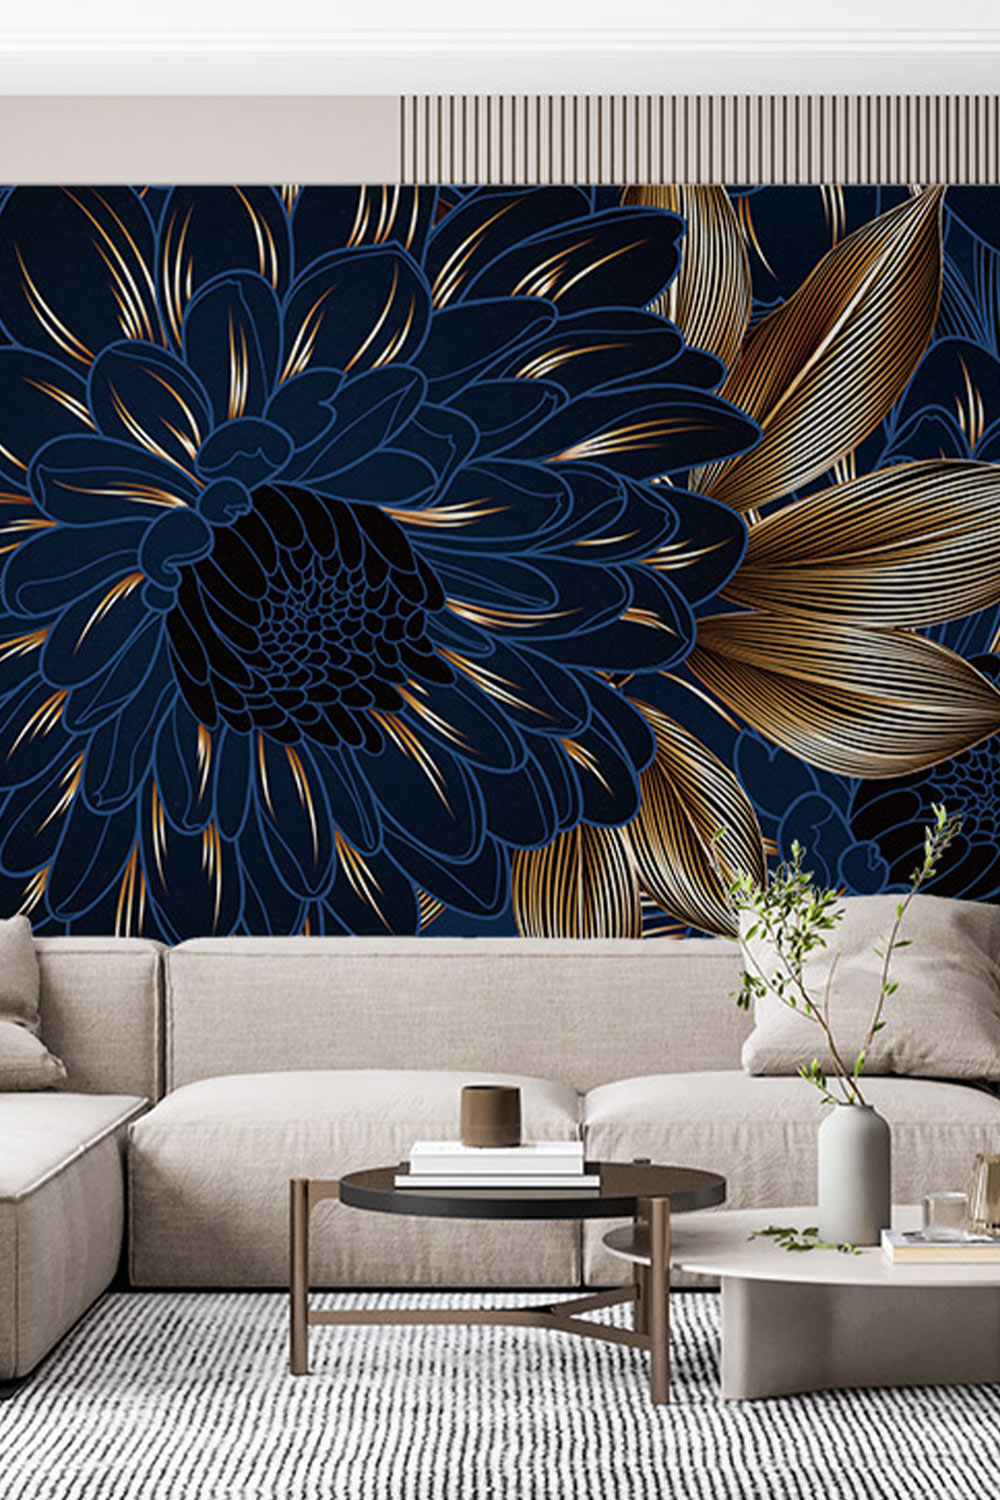 Floral Wallpaper Background Mandala Design In Dark Blue With Copy Space  Stock Illustration  Download Image Now  iStock